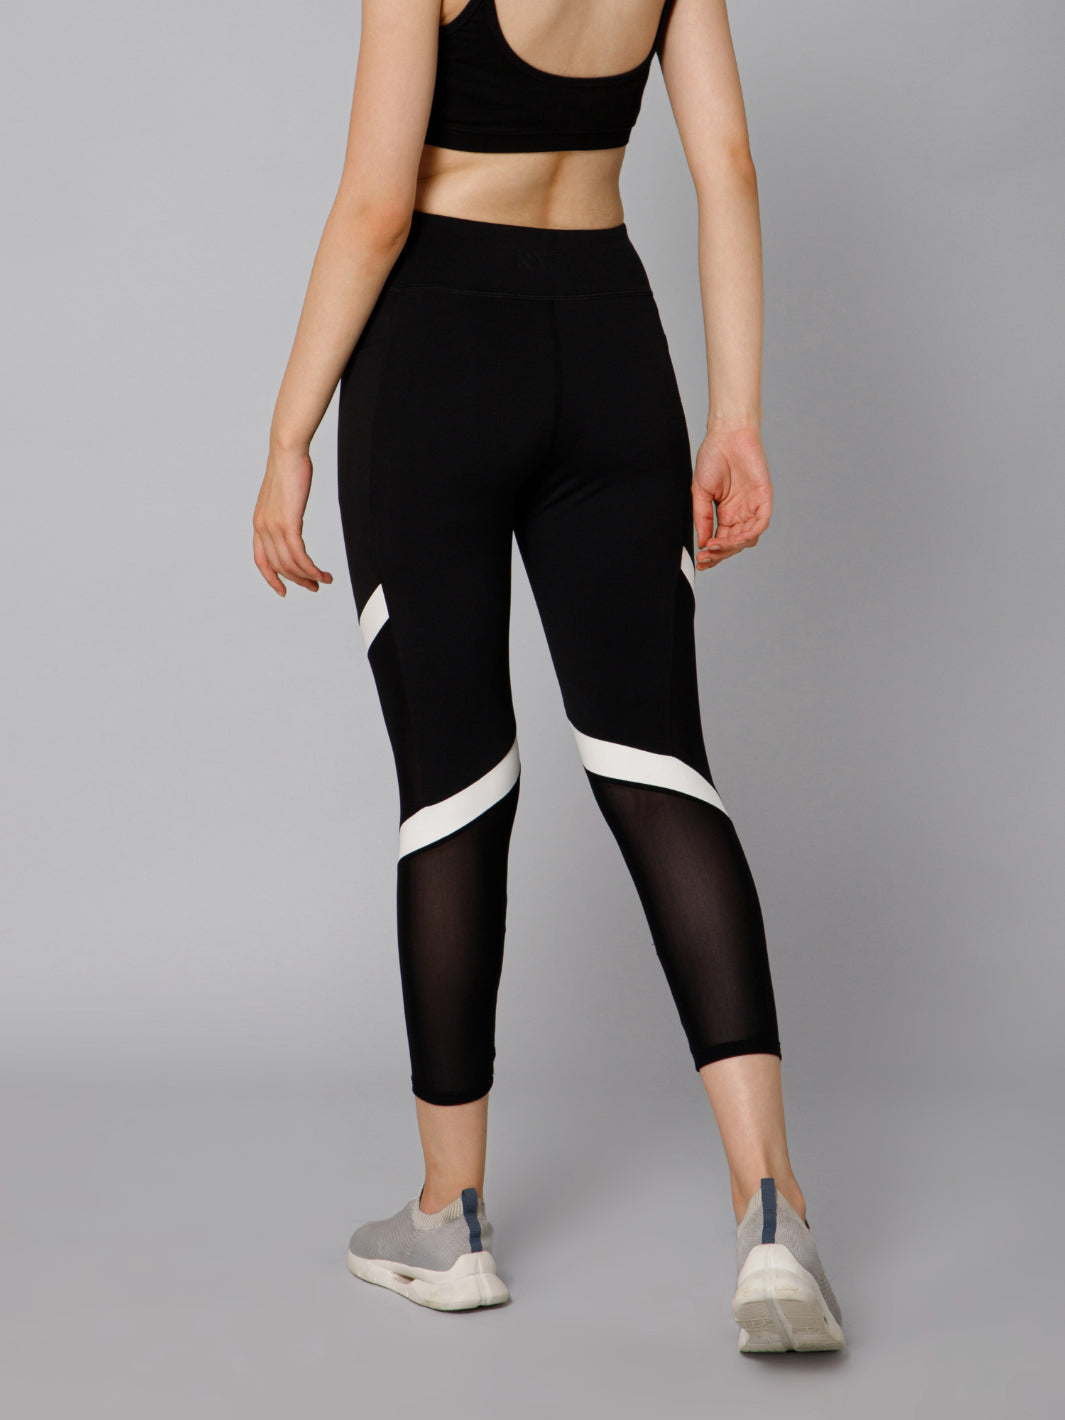 7/8 compression legging with pockets (2 color options) – rhae